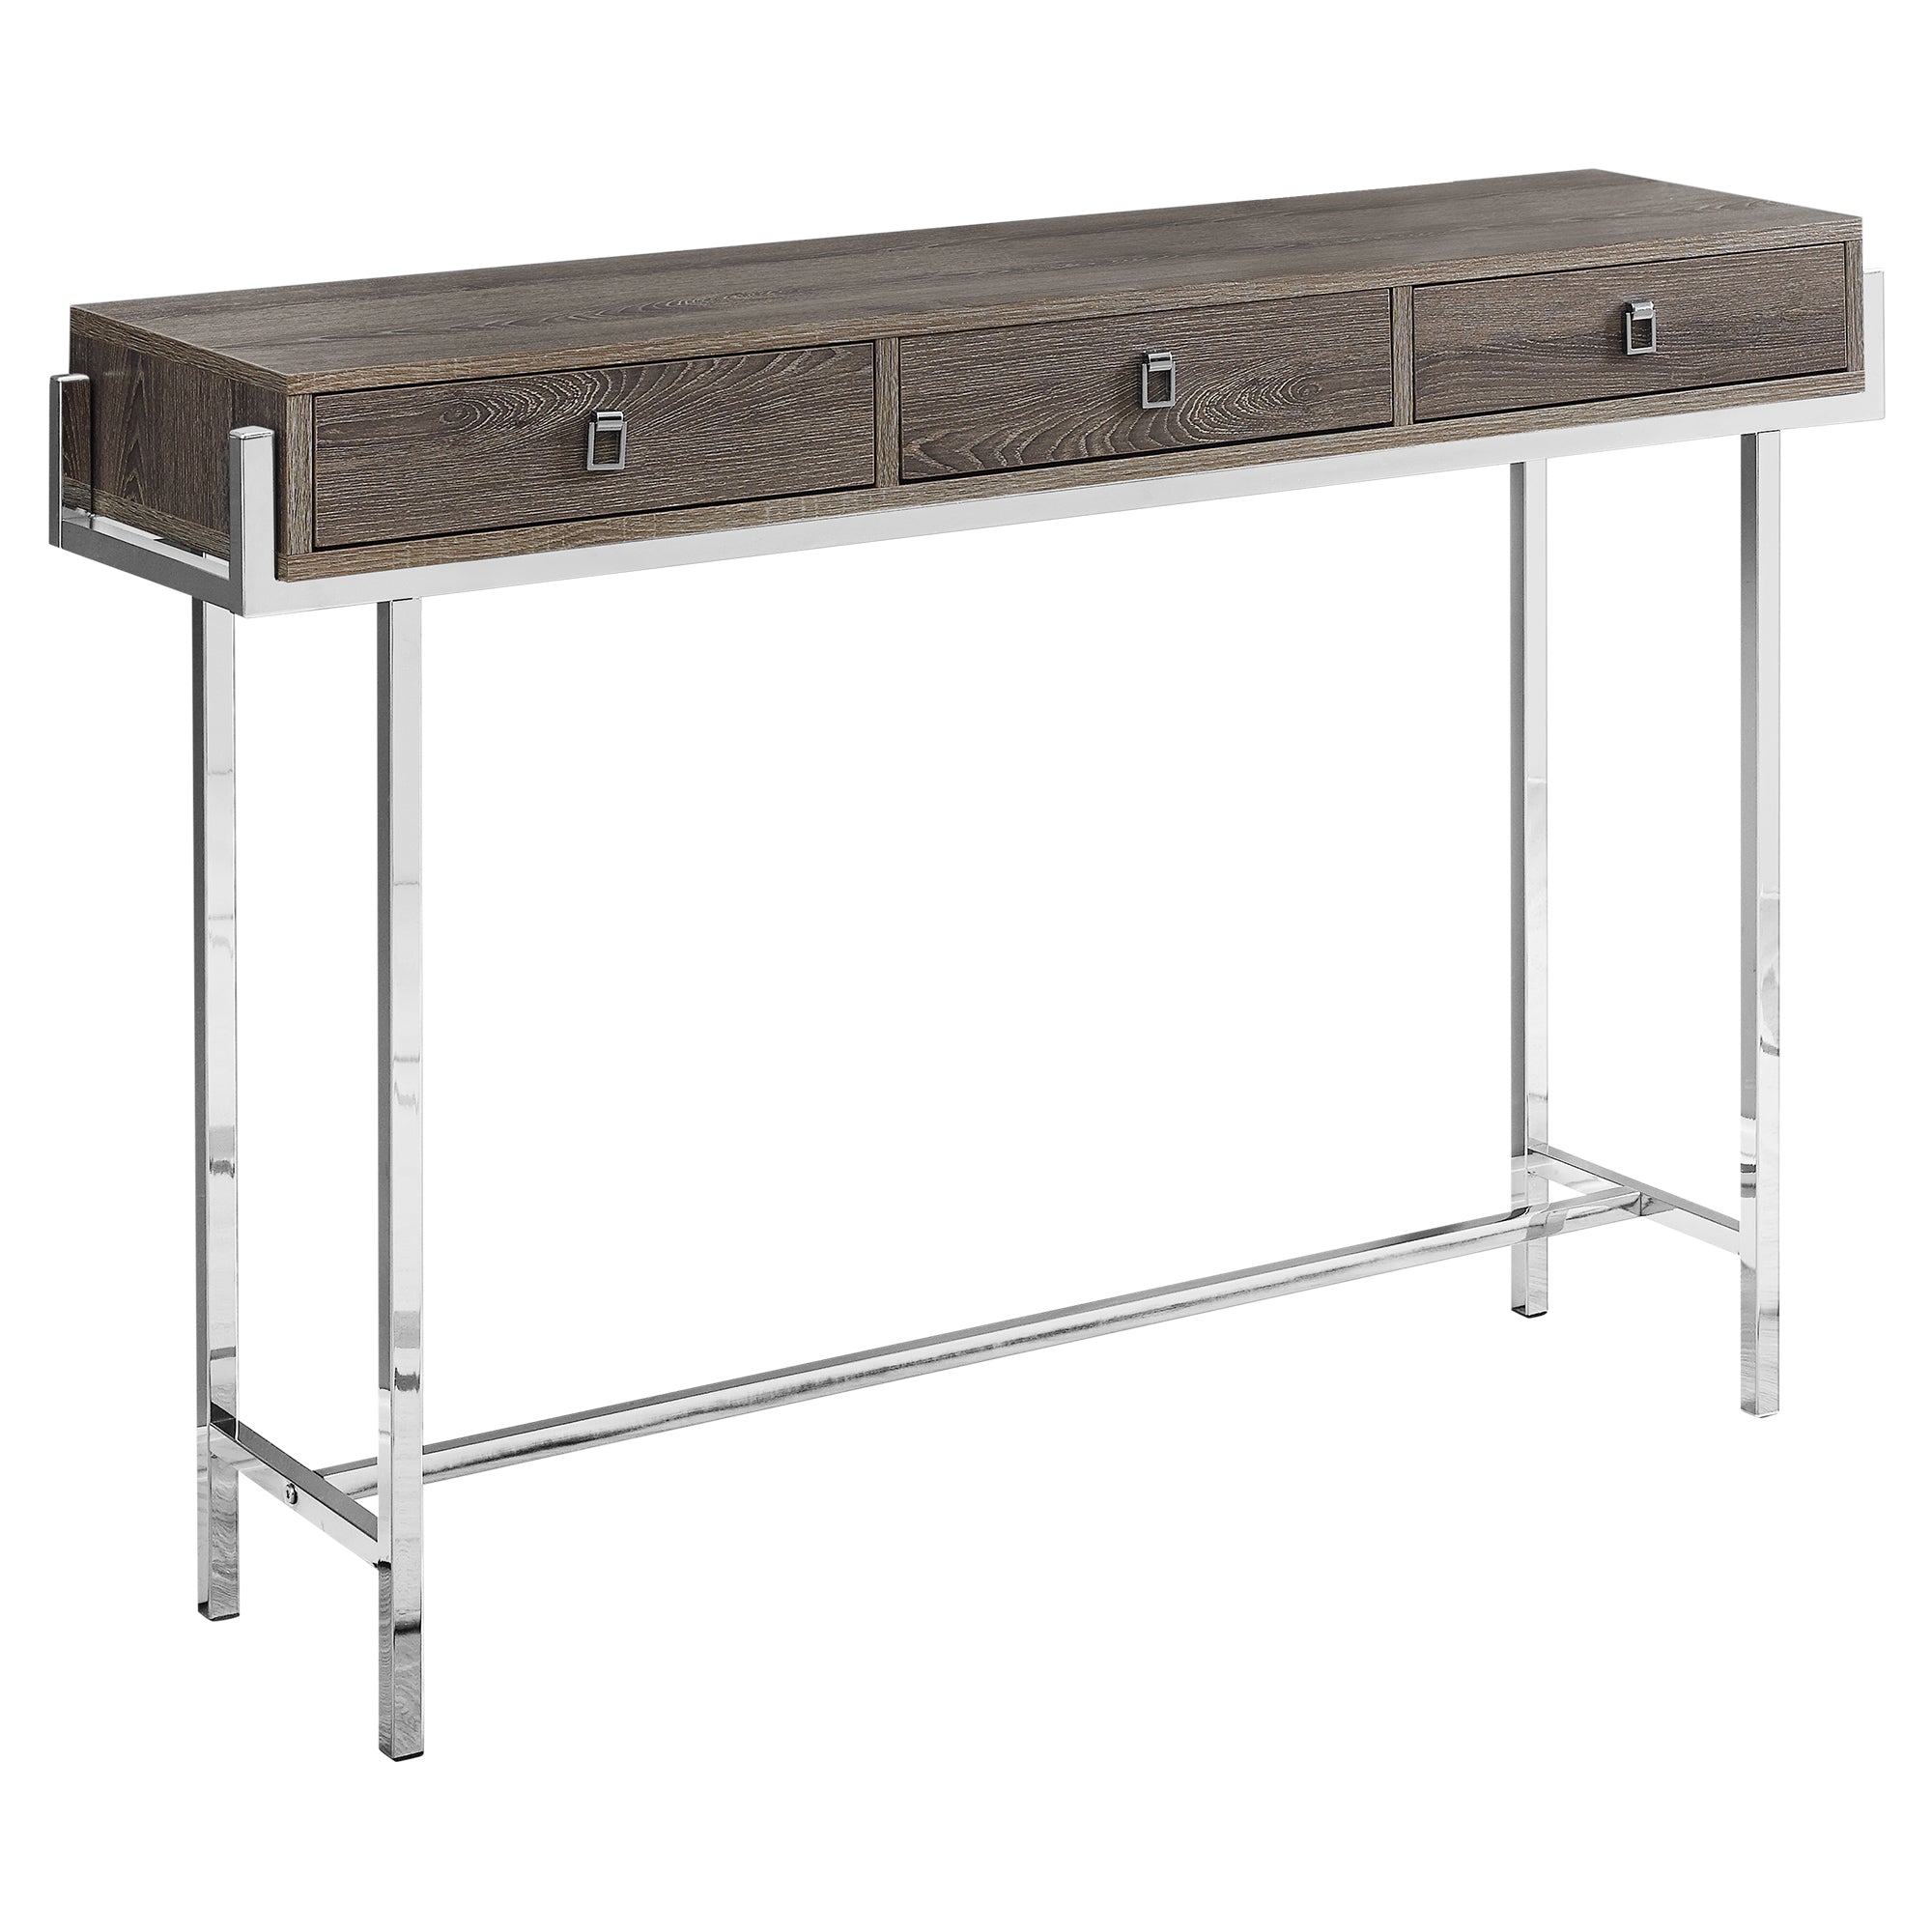 I 3299 - ACCENT TABLE - 48"L / DARK TAUPE / CHROME METAL BY MONARCH SPECIALTIES INC